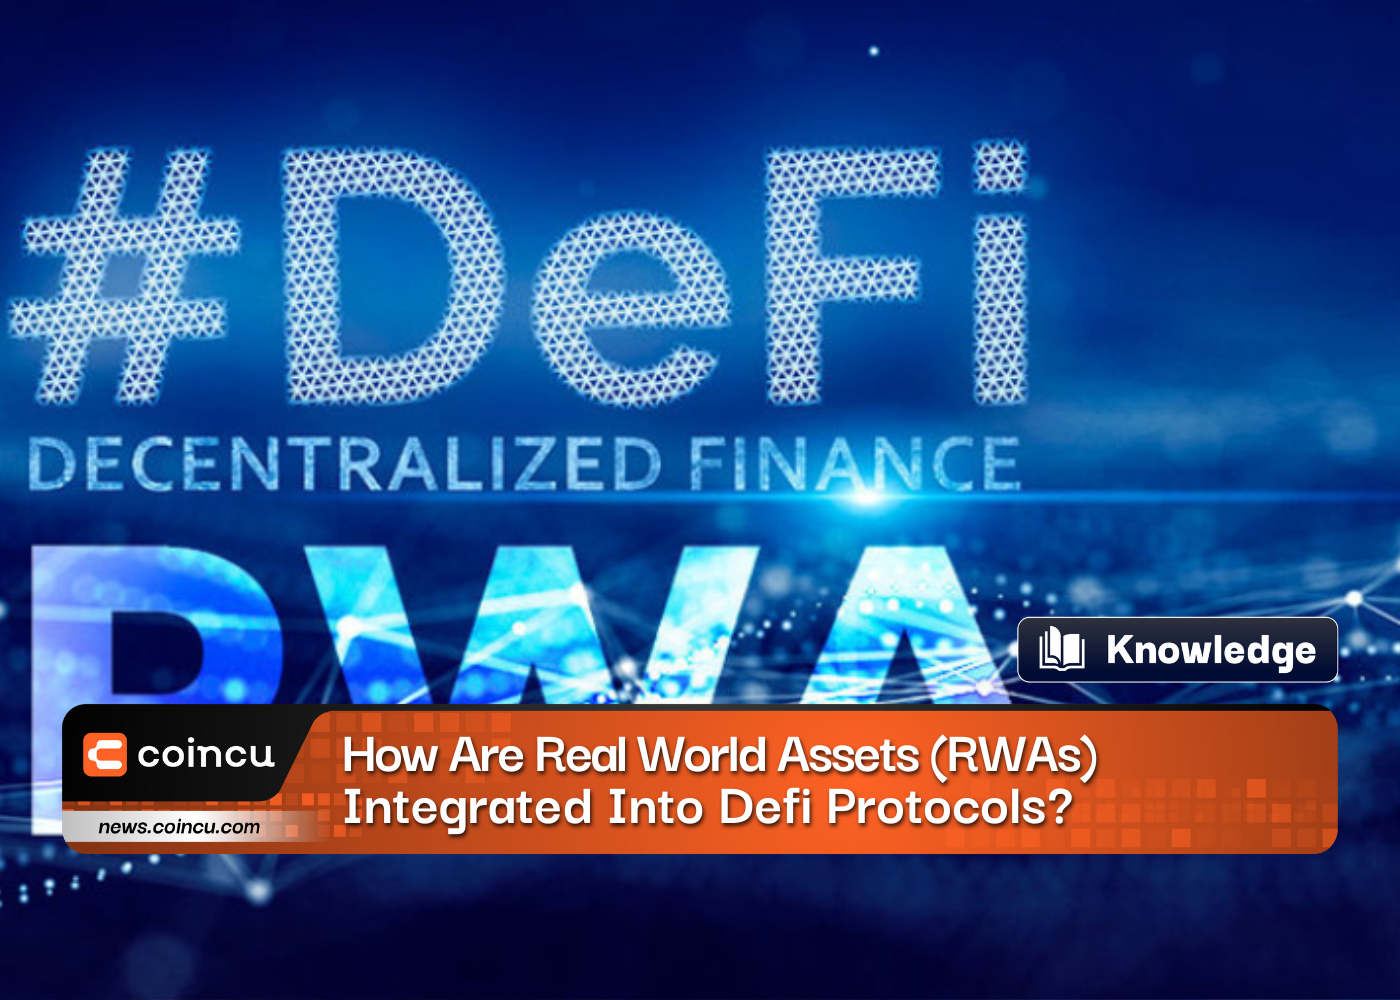 How Are Real World Assets (RWAs) Integrated Into Defi Protocols?